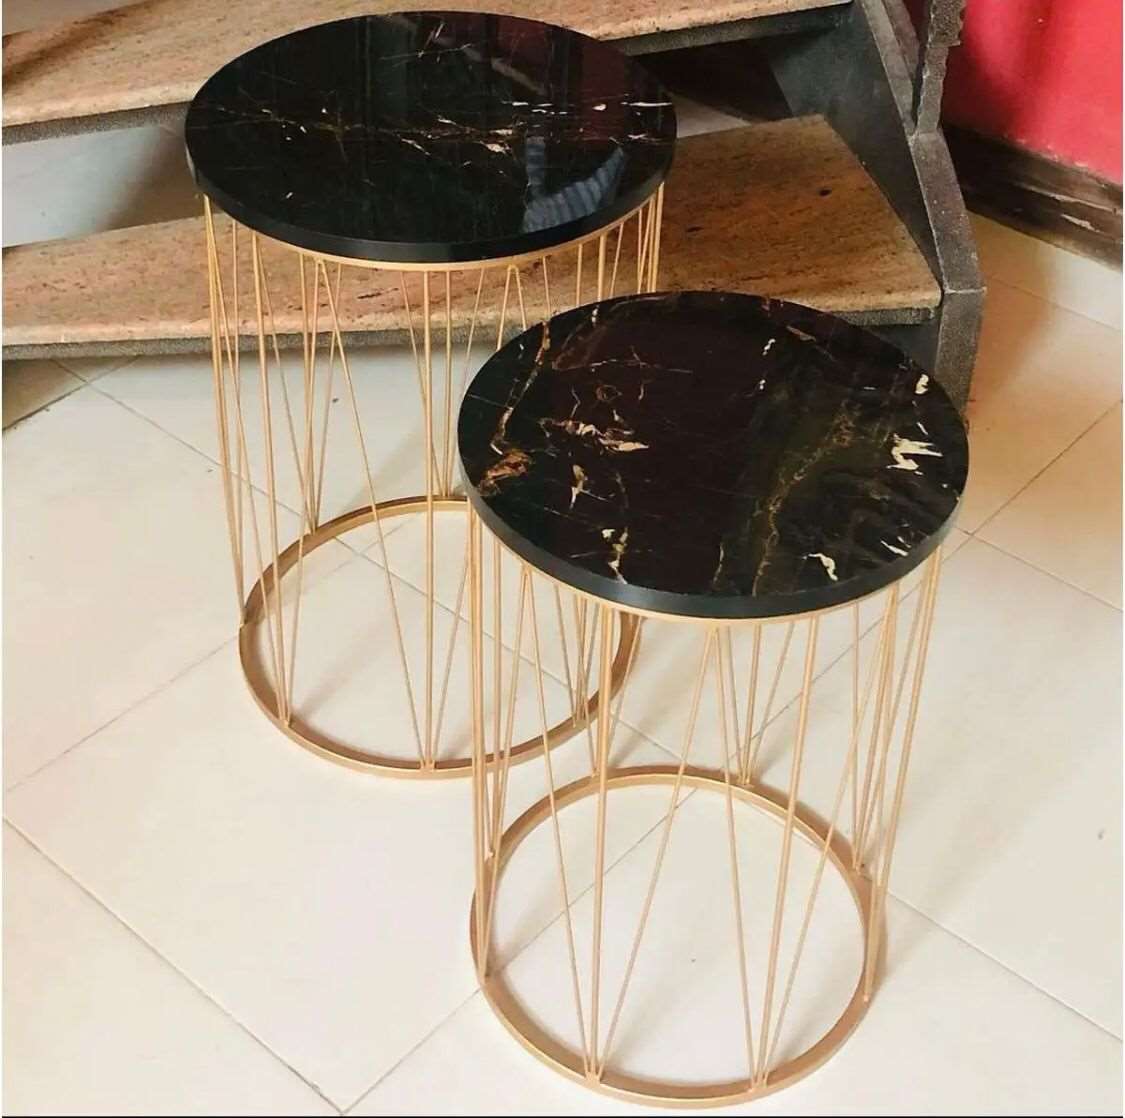 Nesting table gold plated metal(1pc) with marble texture( 22inch hight)(16inch top) SF Traders